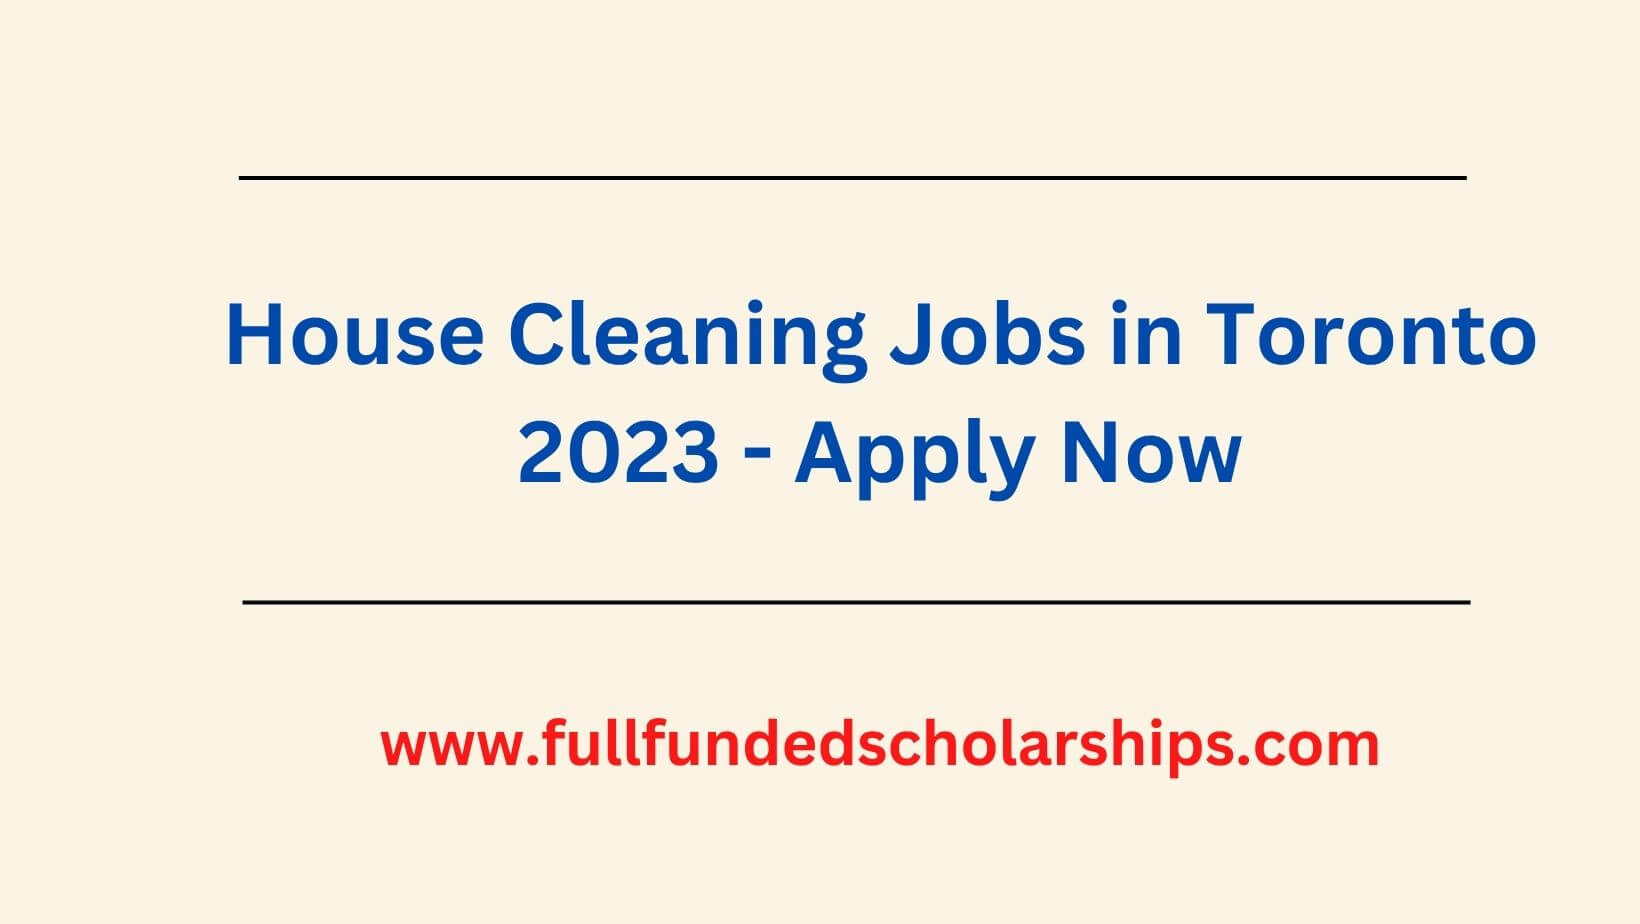 House Cleaning Jobs in Toronto 2023